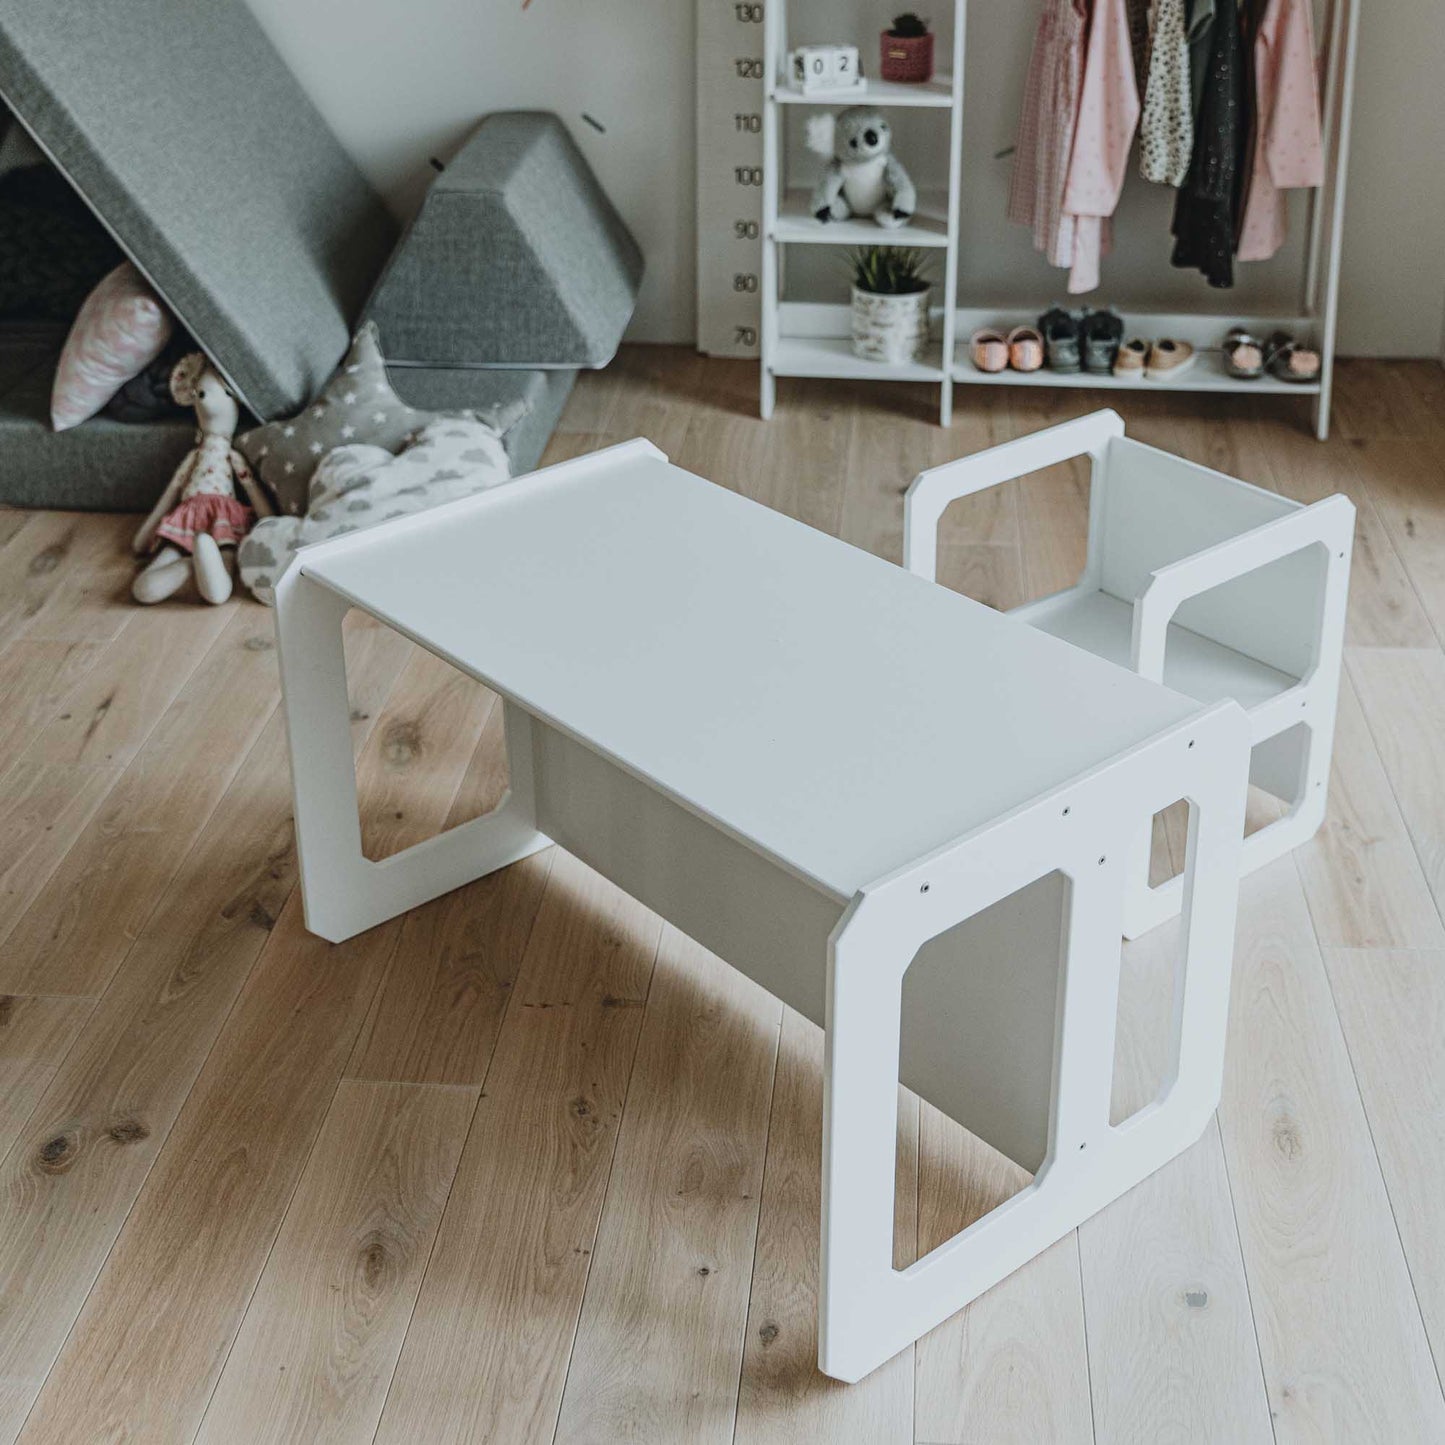 A Sweet Home From Wood Montessori weaning table and chair set in a child's room.